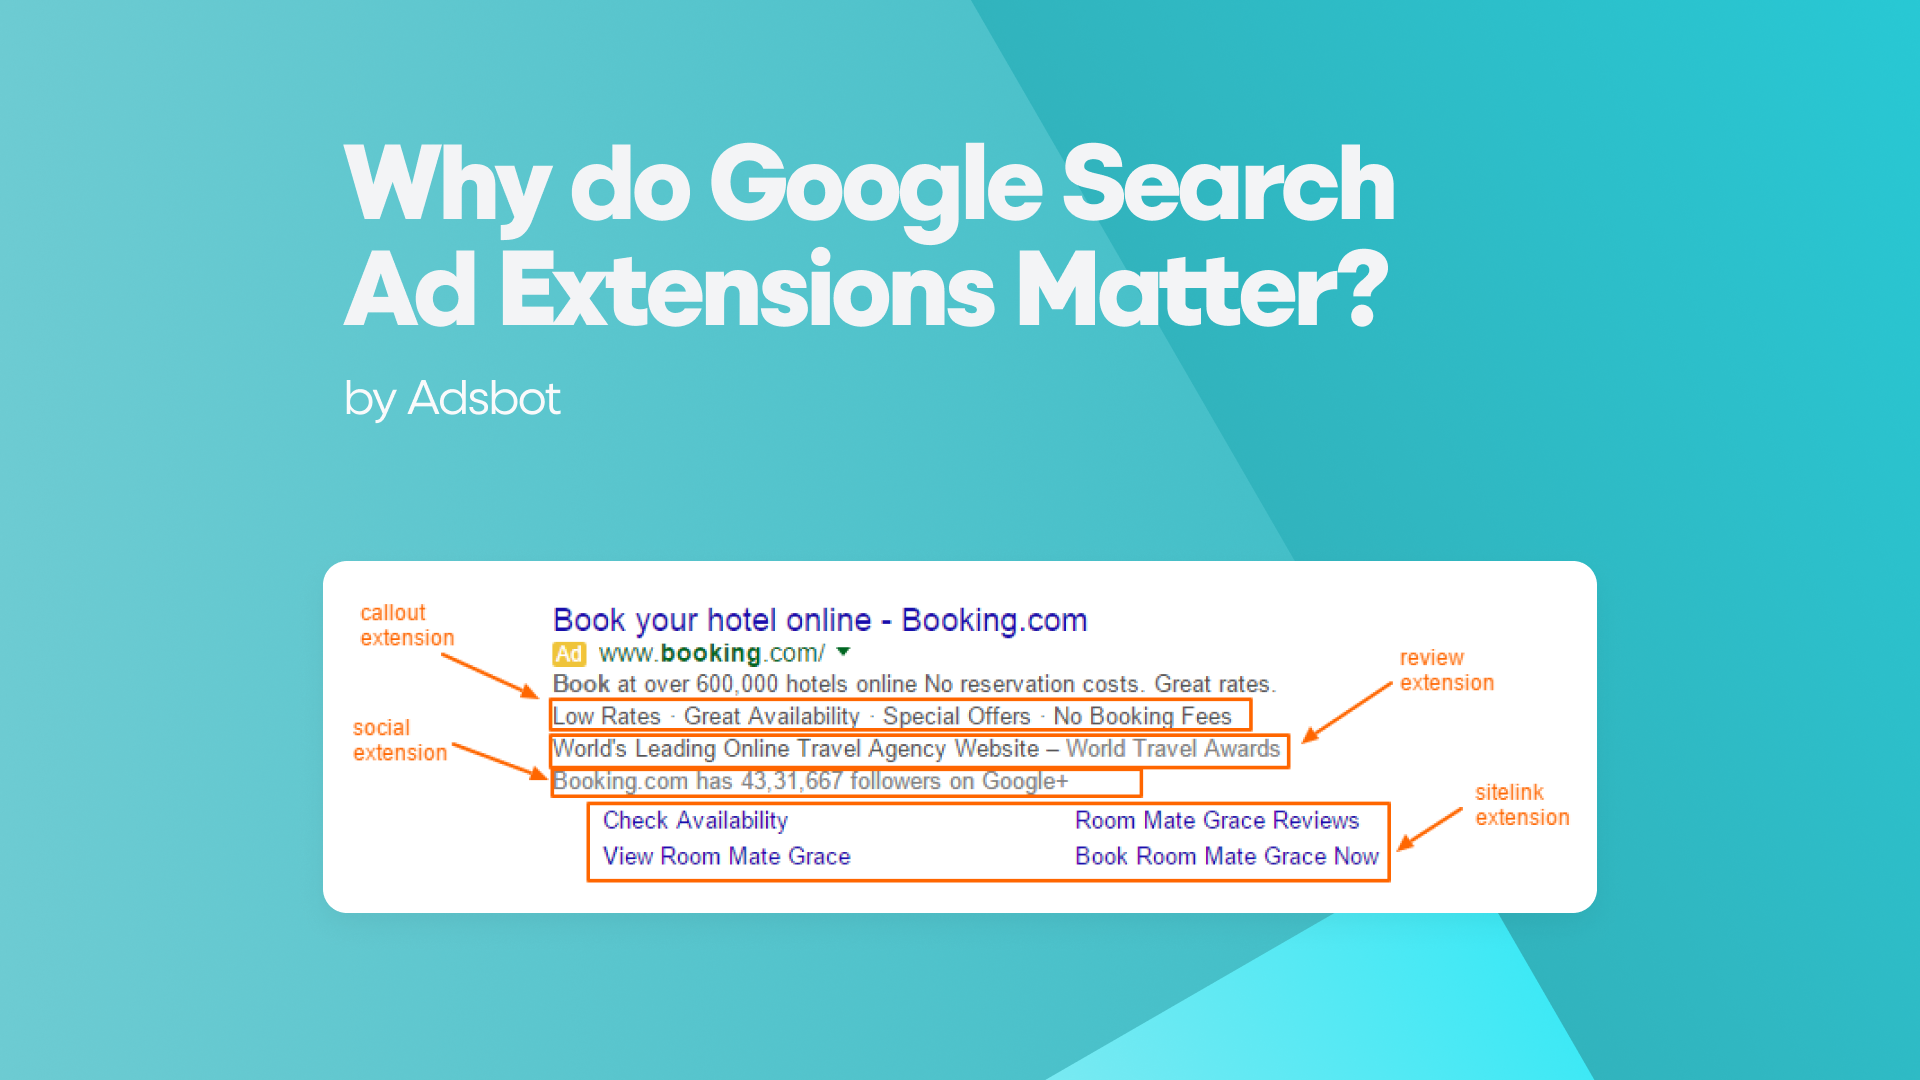 Why do Google Search Ad Extensions Matter?